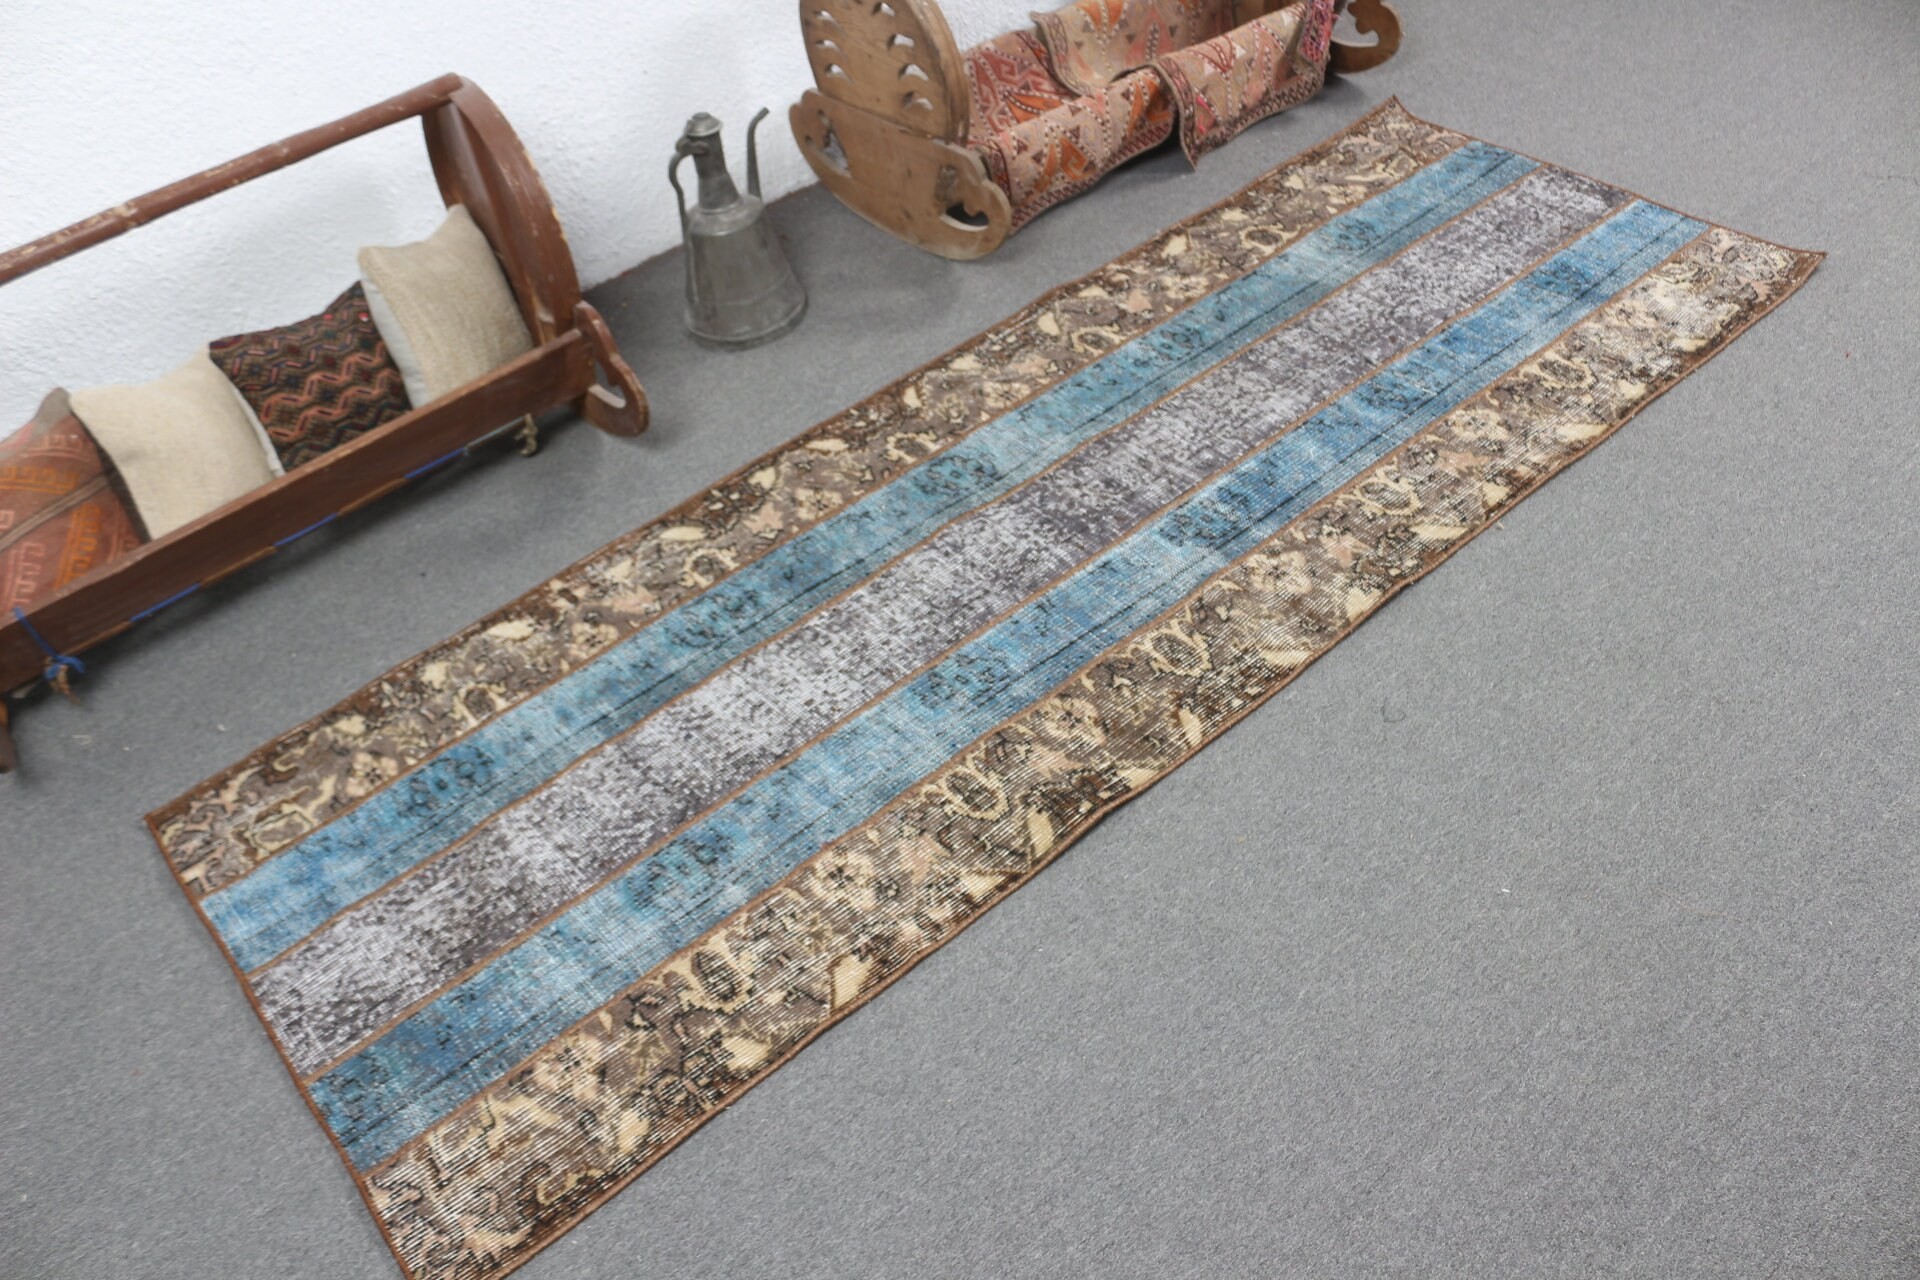 Blue Home Decor Rugs, Vintage Rug, Old Rugs, Corridor Rug, Stair Rug, 2.8x7.8 ft Runner Rug, Home Decor Rugs, Turkish Rugs, Cool Rugs